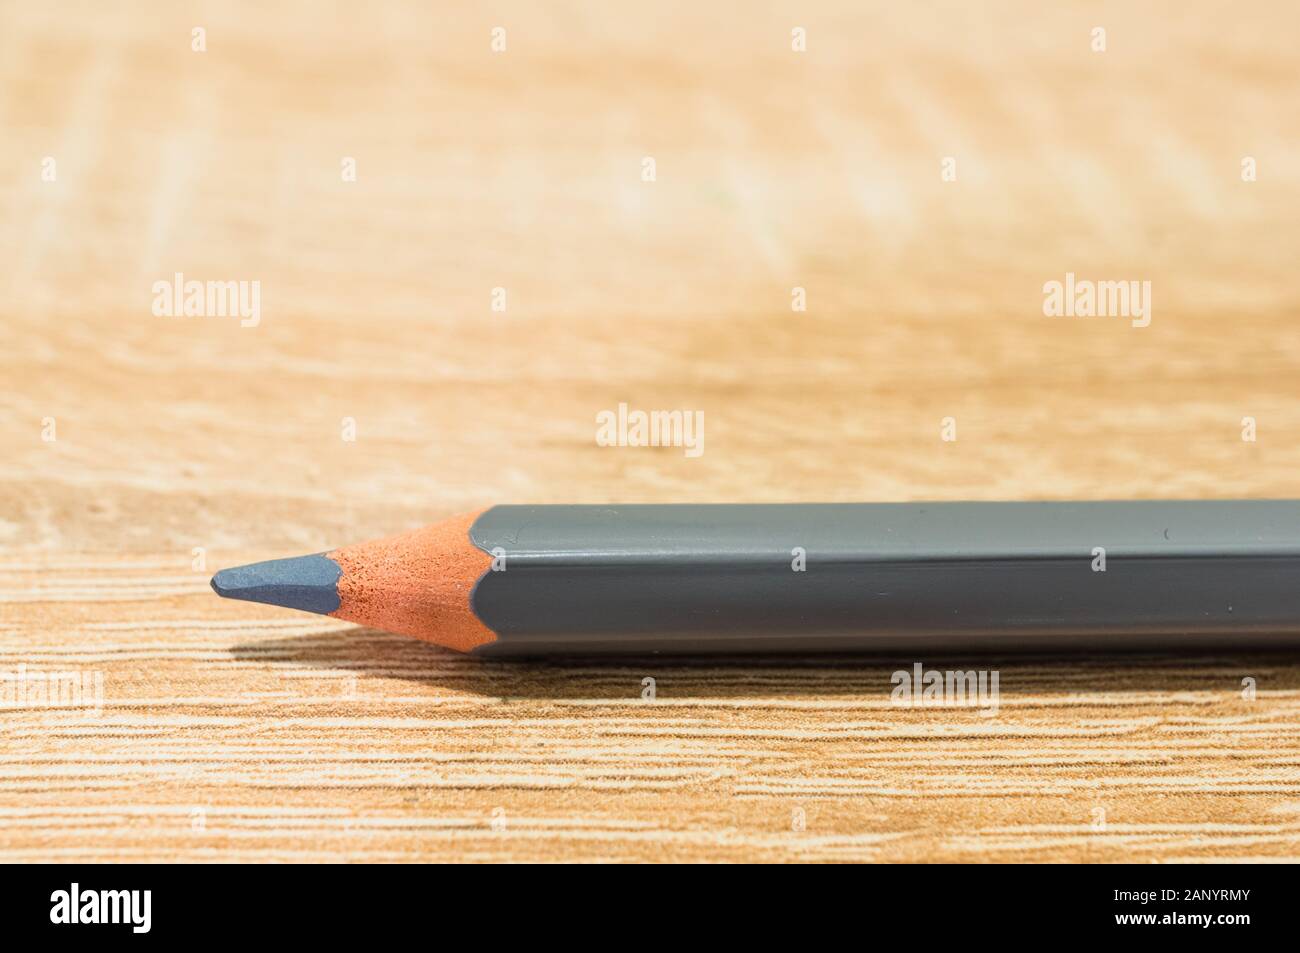 Closeup shot of a grey pencil on a wooden surface Stock Photo